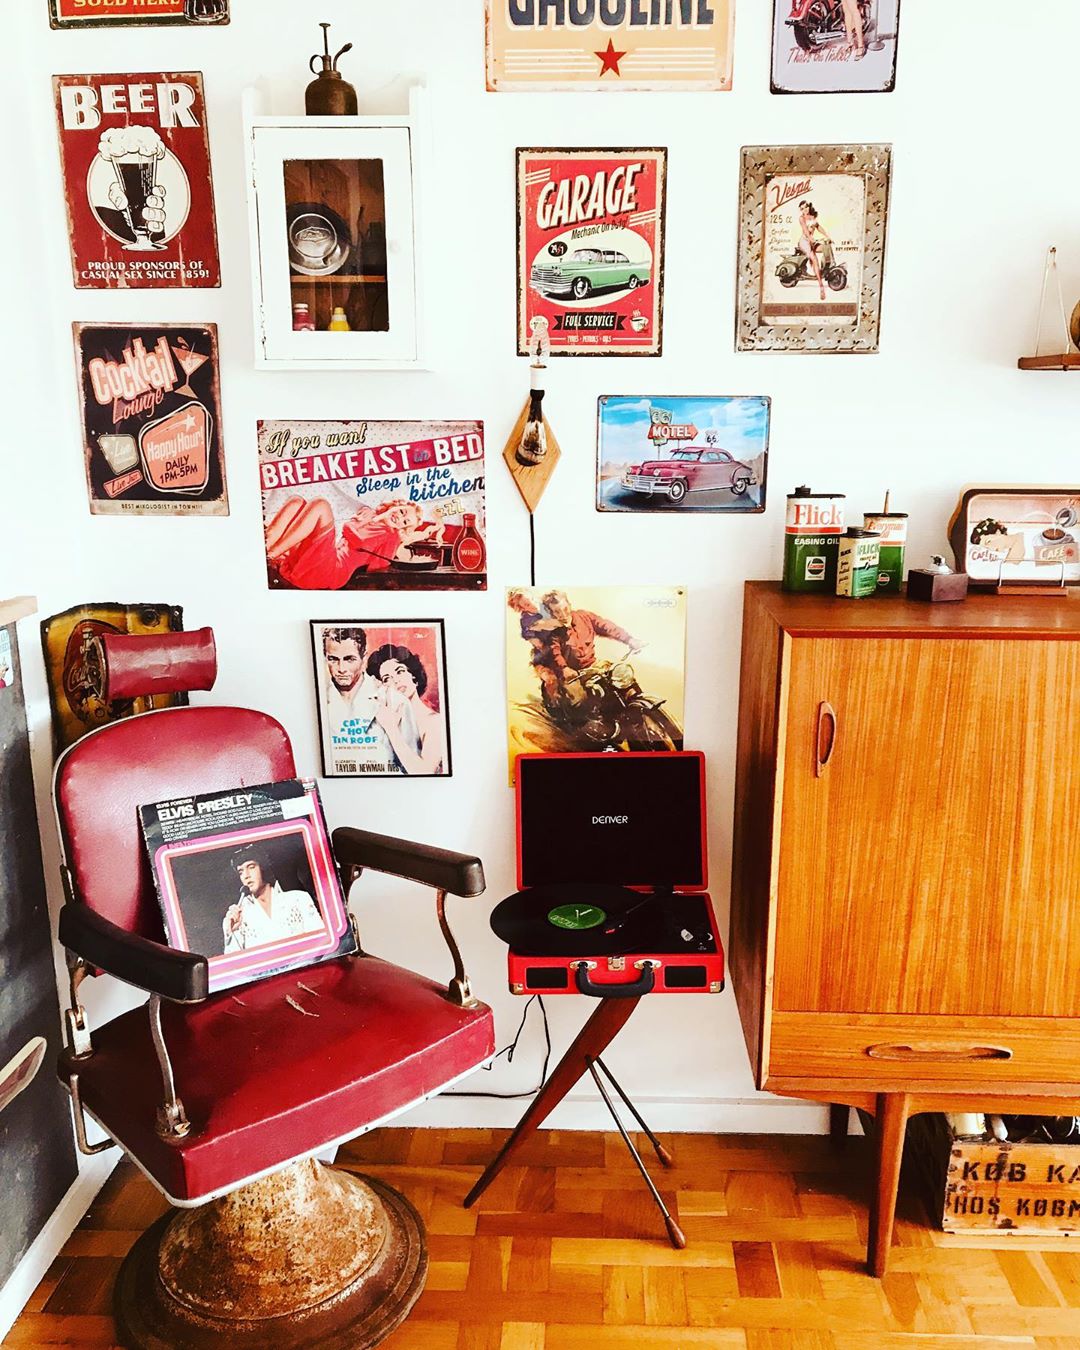 Room with tin signs on wall and red chair. Photo by Instagram user @vampeva